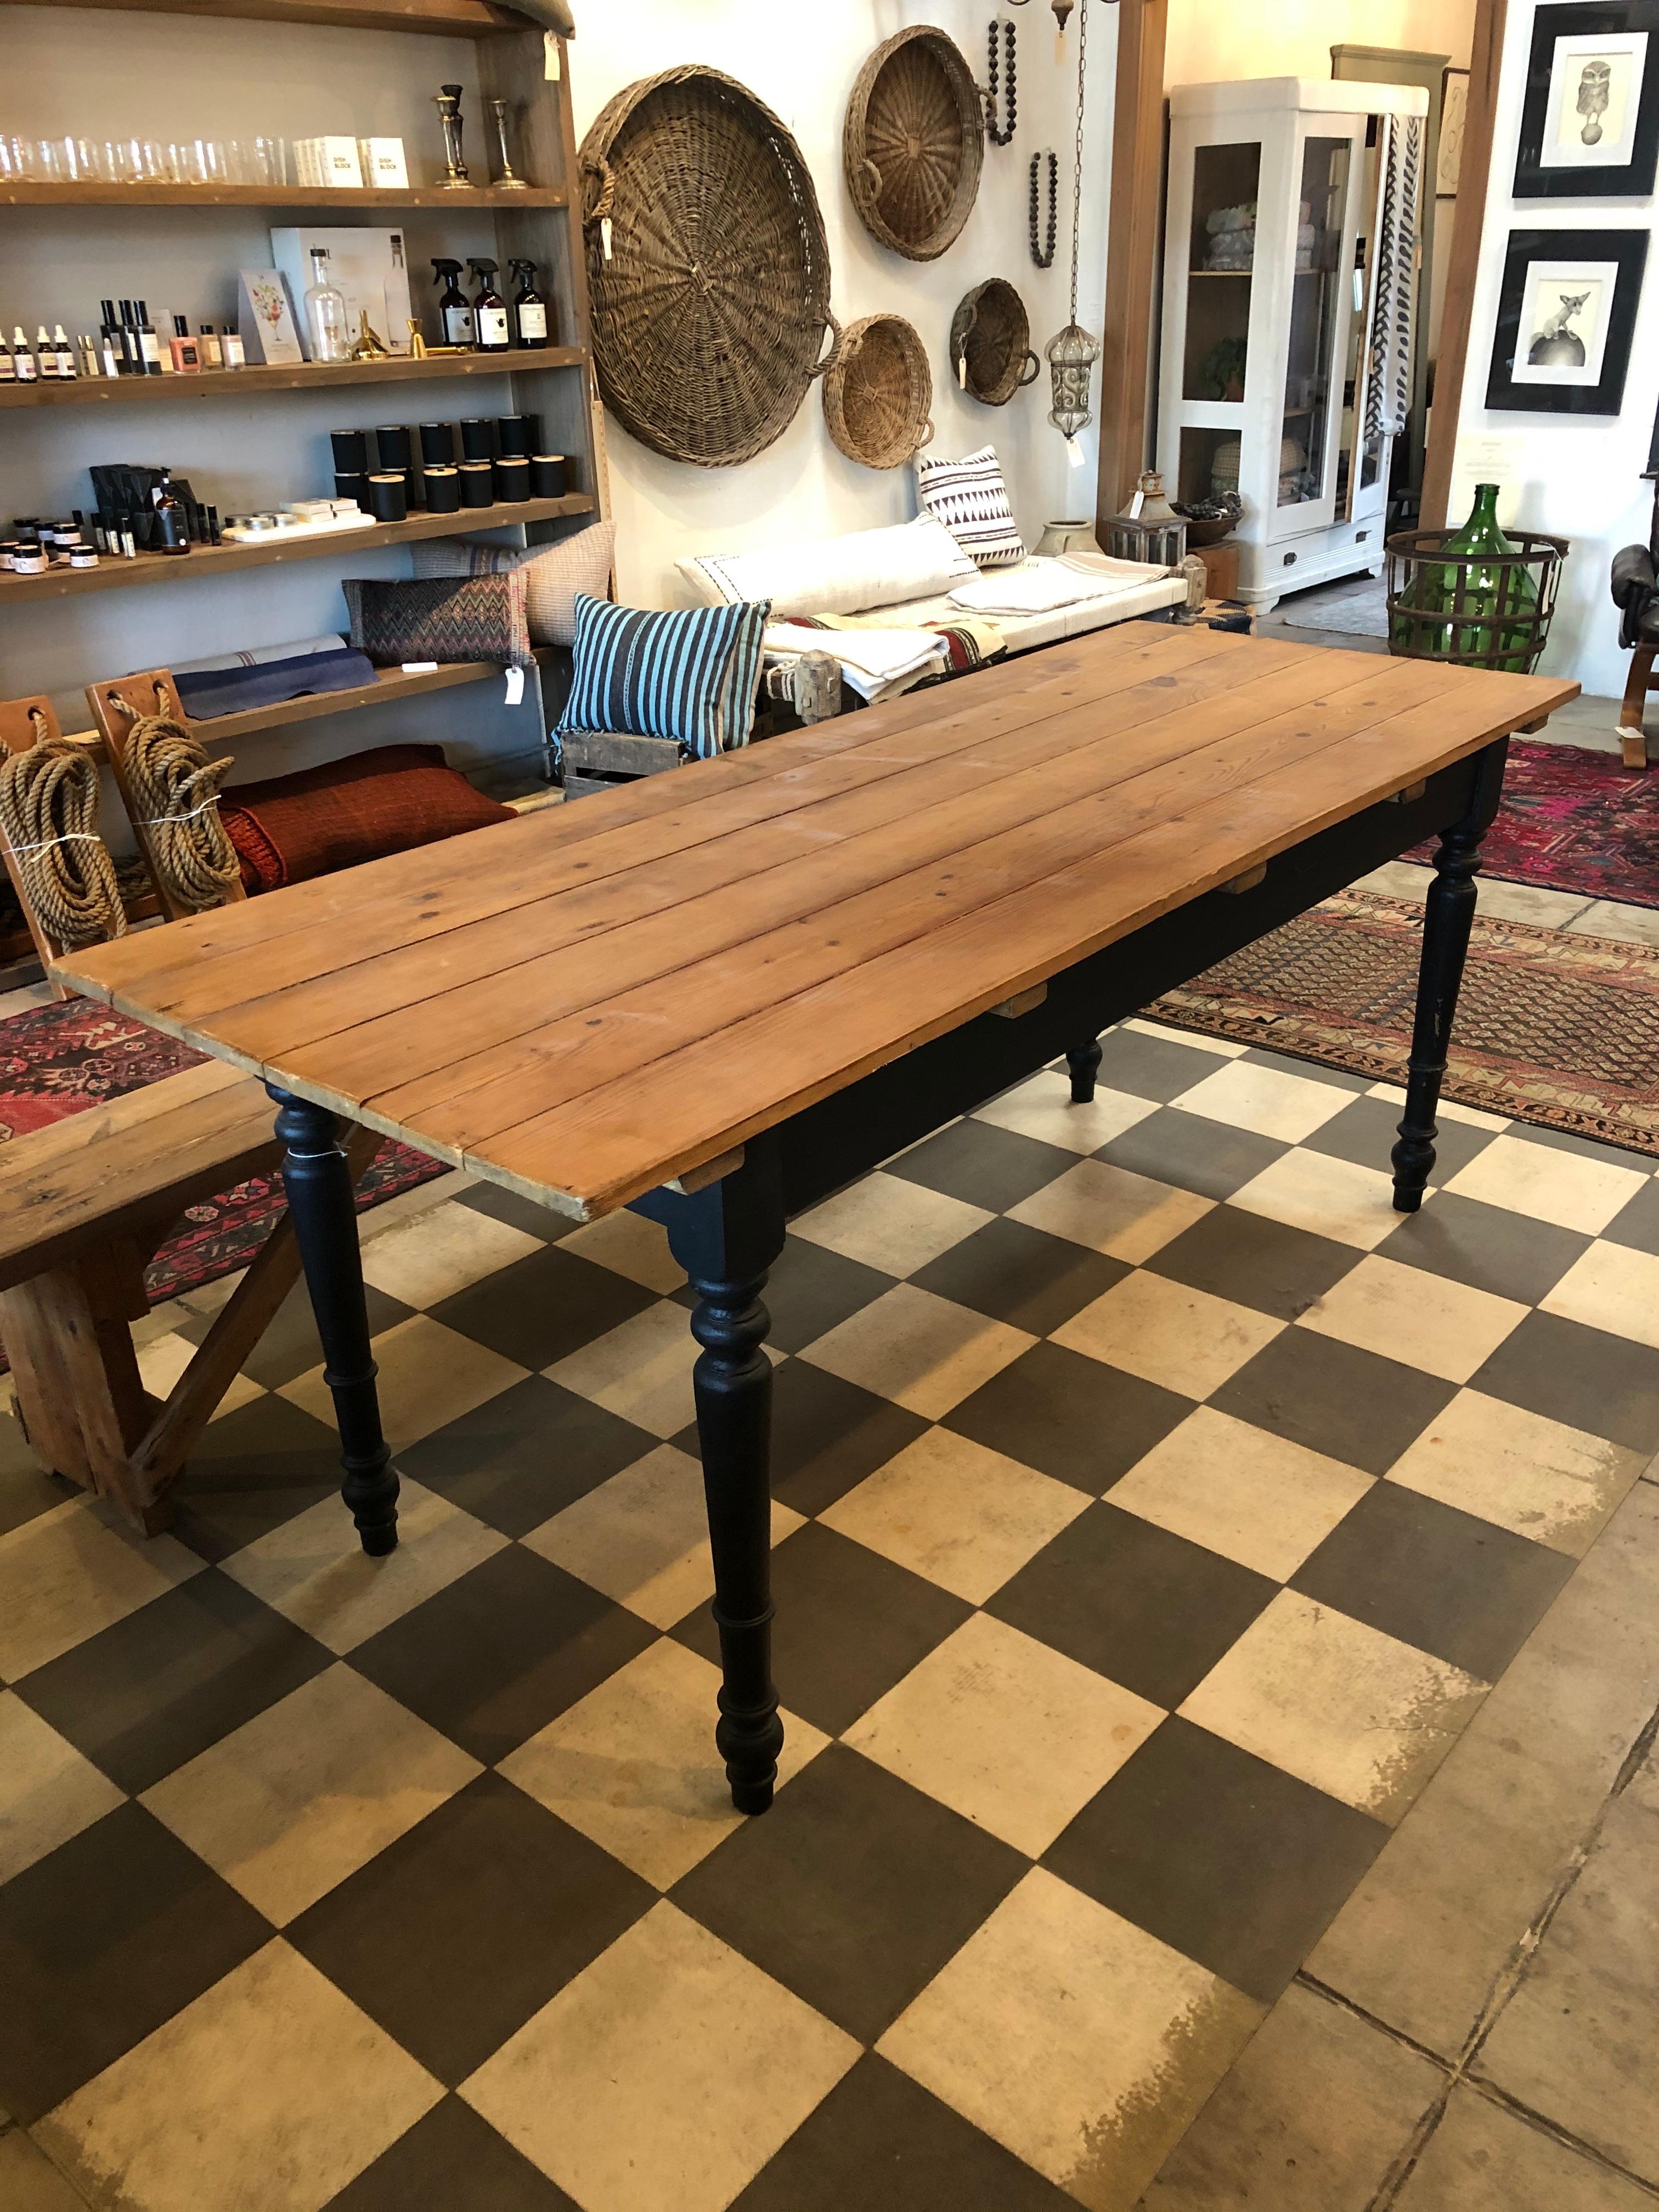 Vintage, rustic, European farm table with a newly painted dark grey base. The perfect dining table to add character to any space.